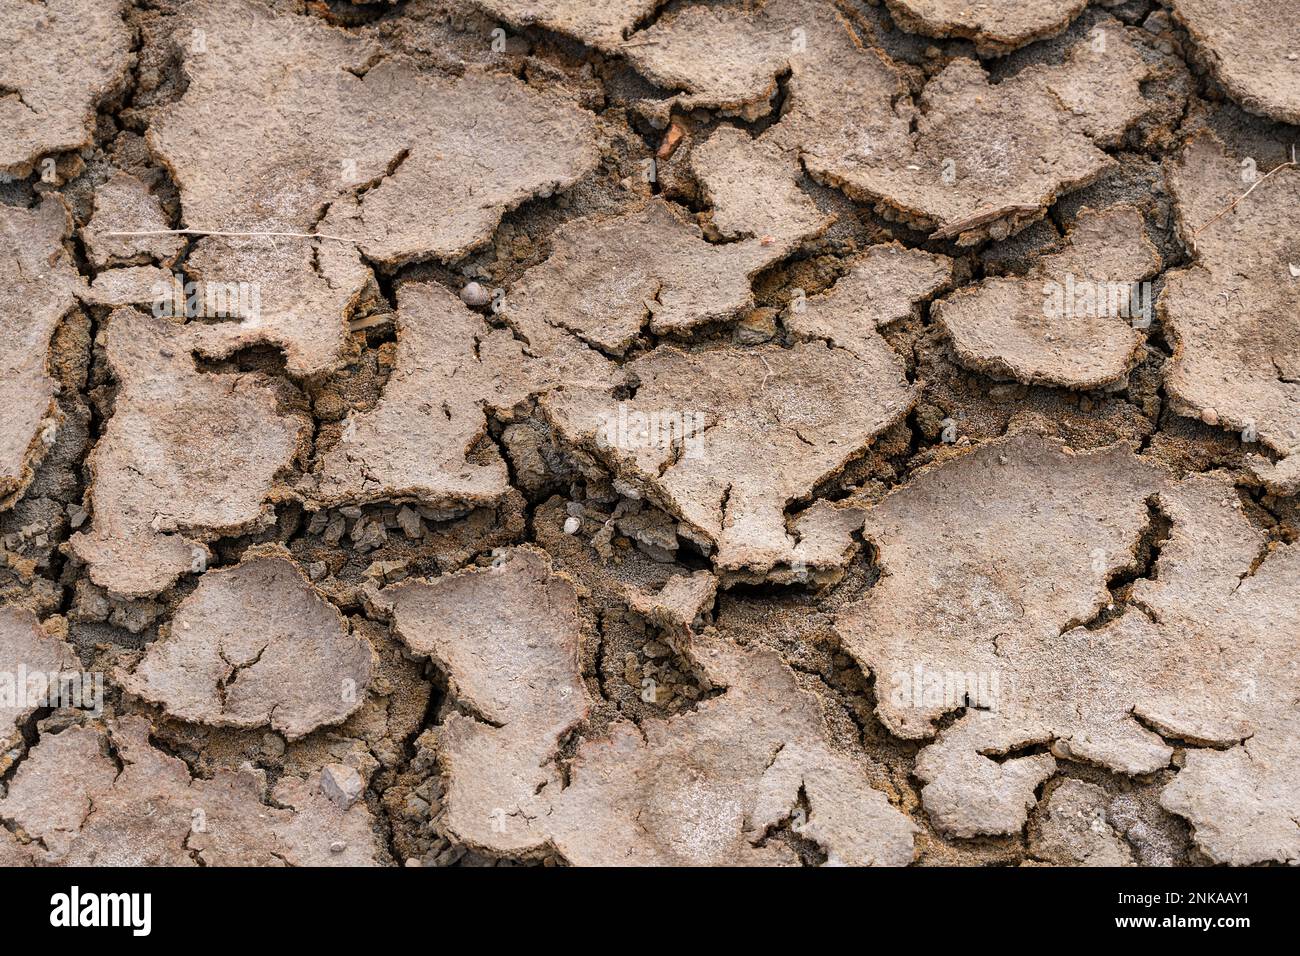 detail of earth cracked by drought Stock Photo